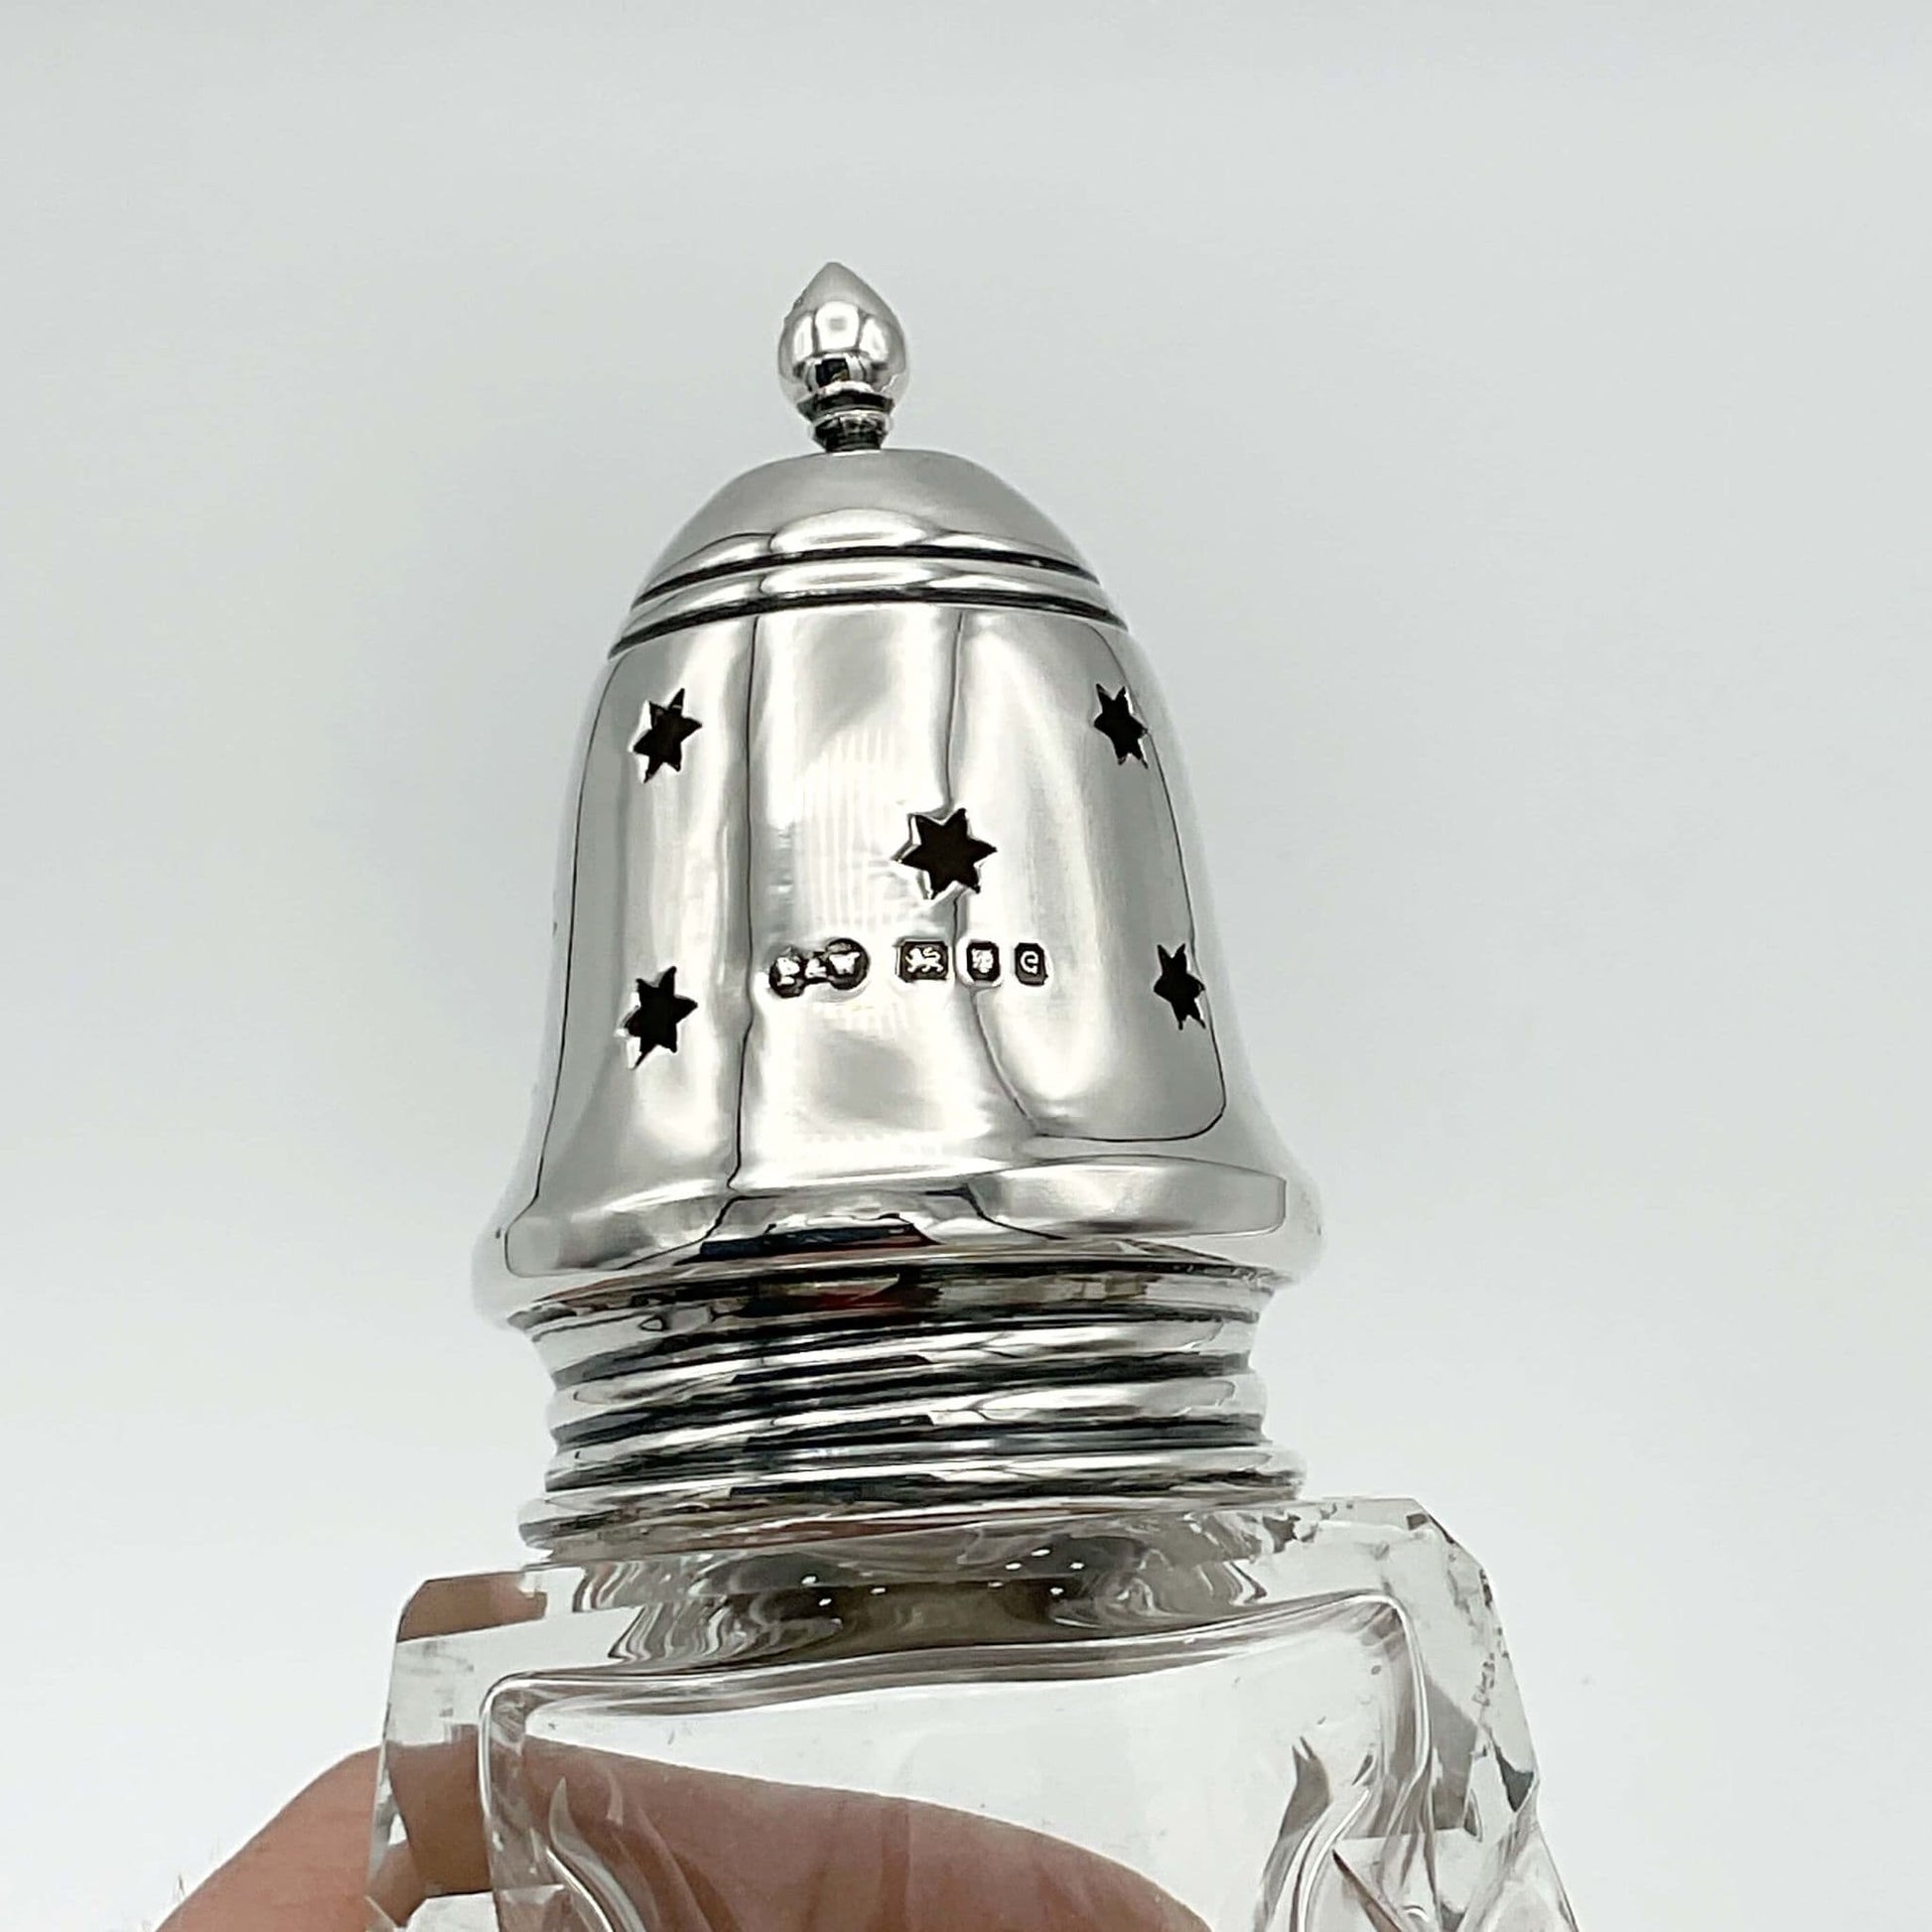 Sterling Silver lid of sugar shaker with stars and hallmarks